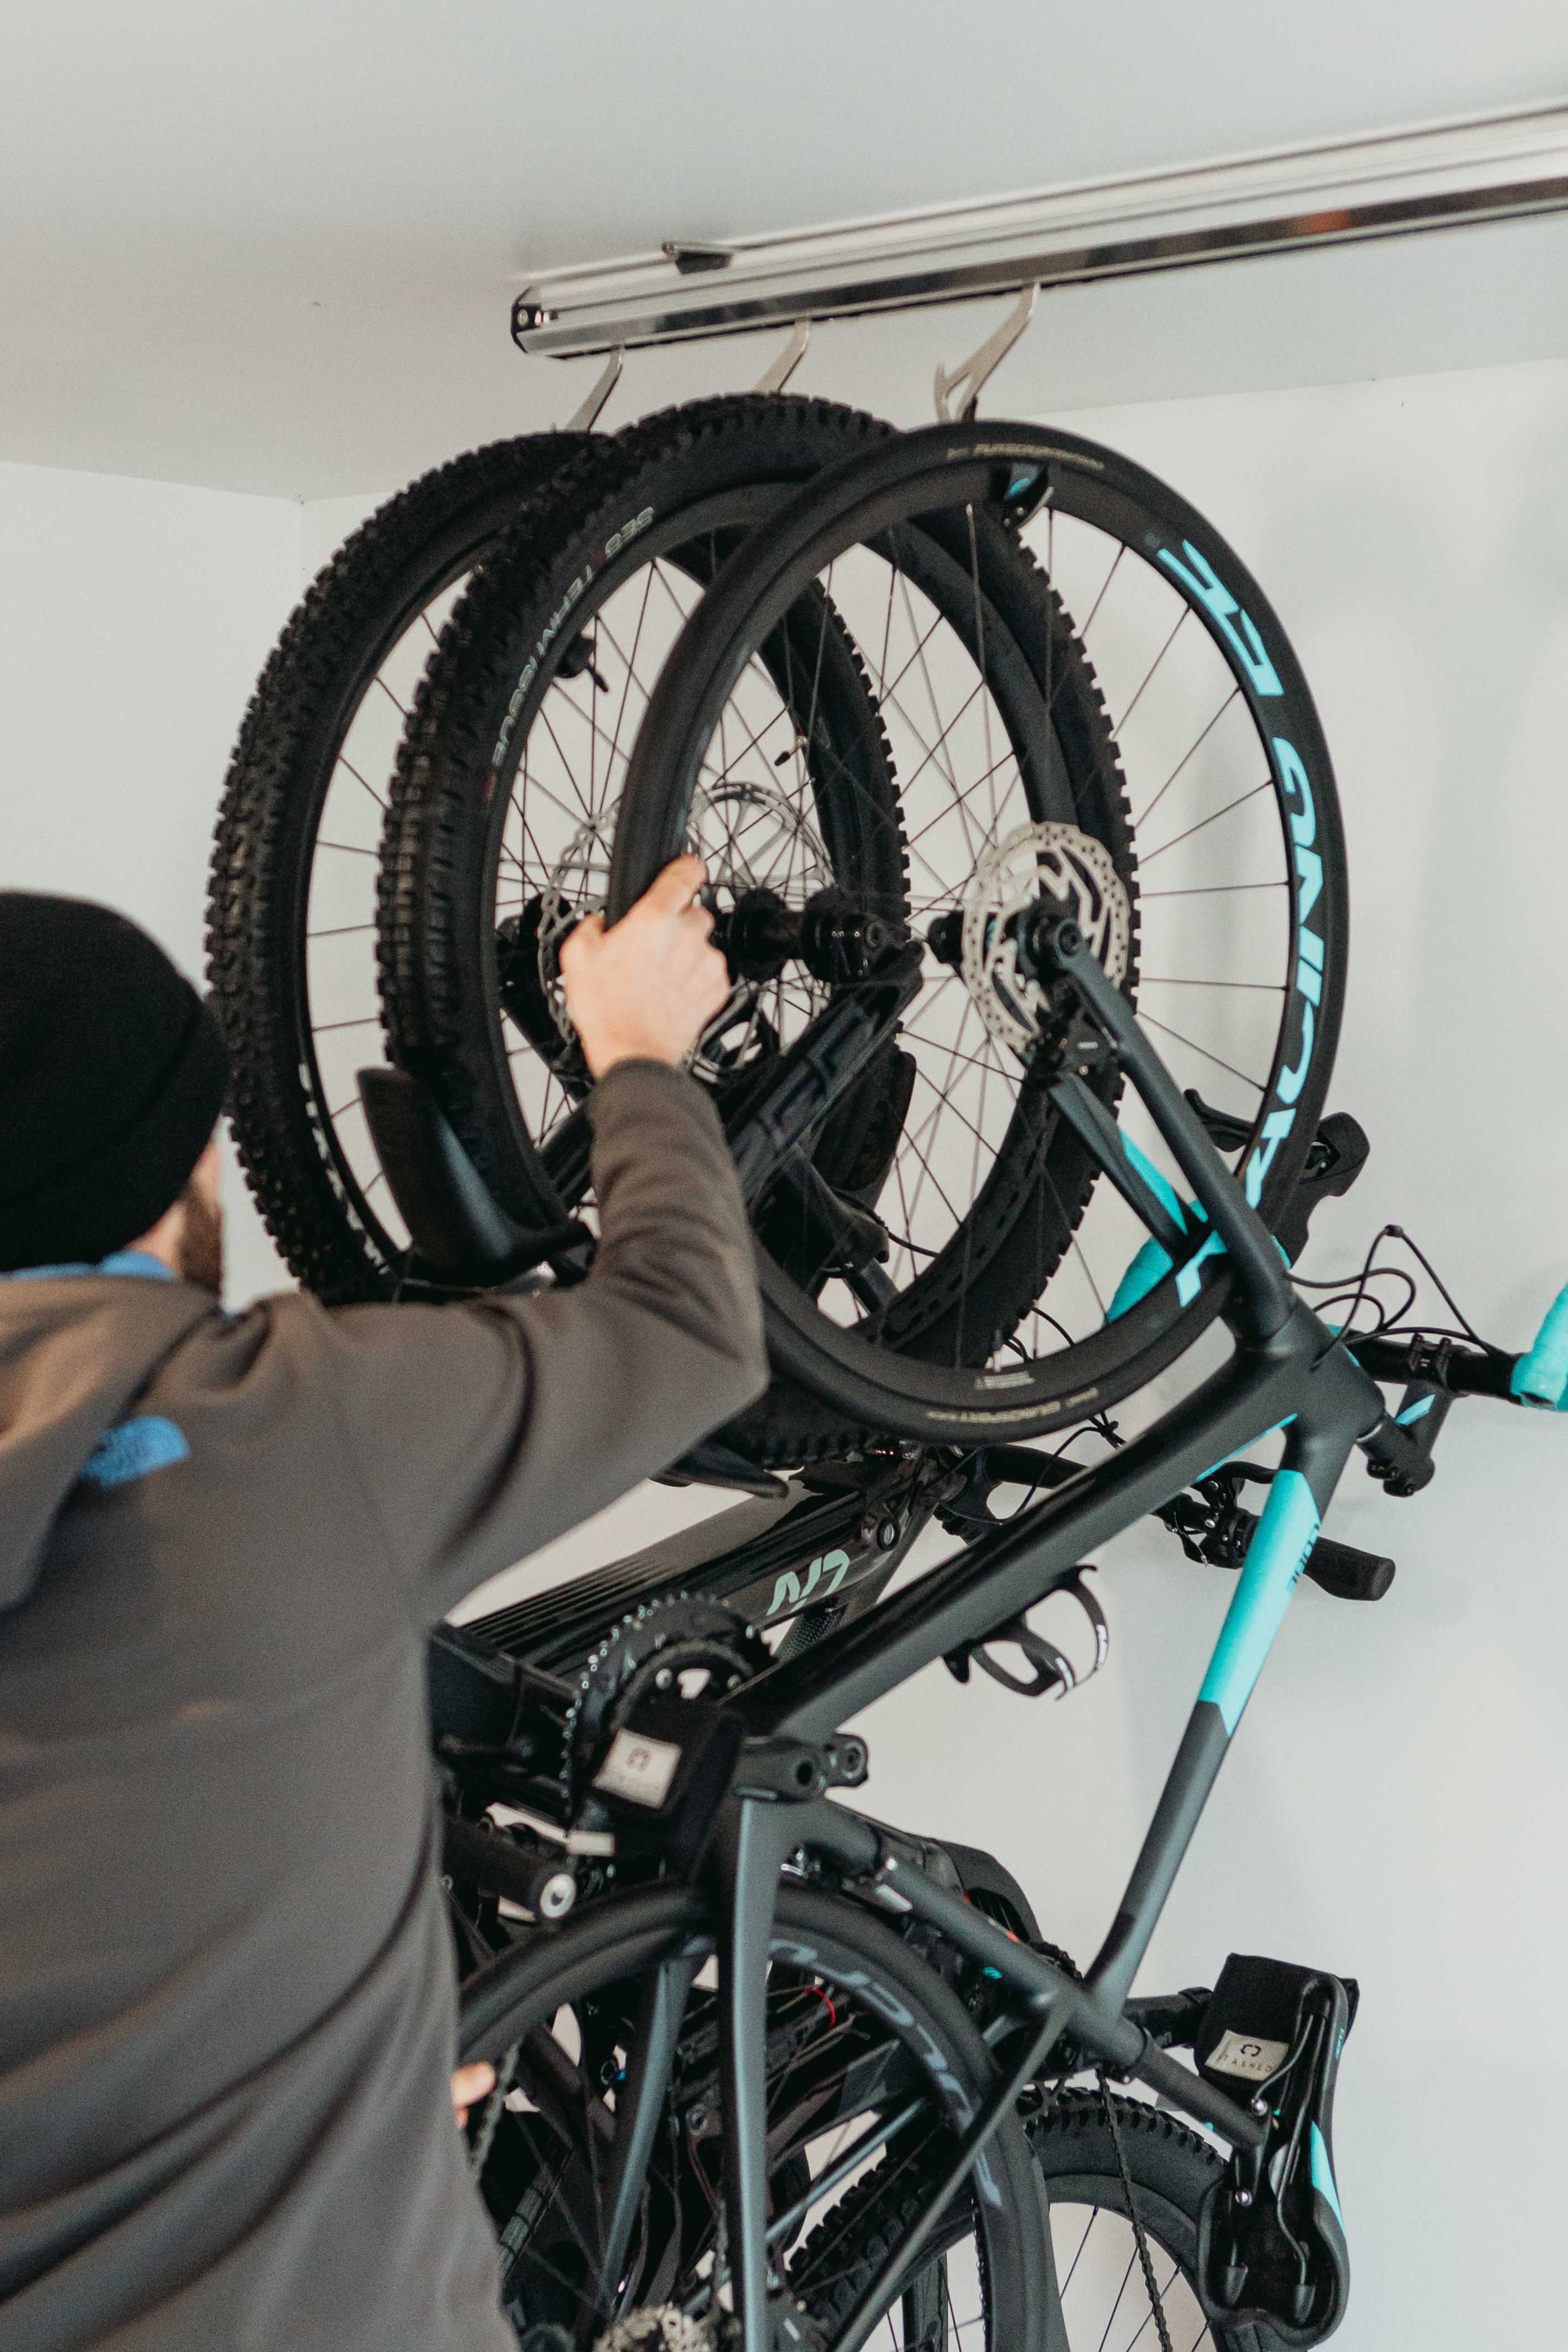 Stashed Products - Bike Storage Systems and Security